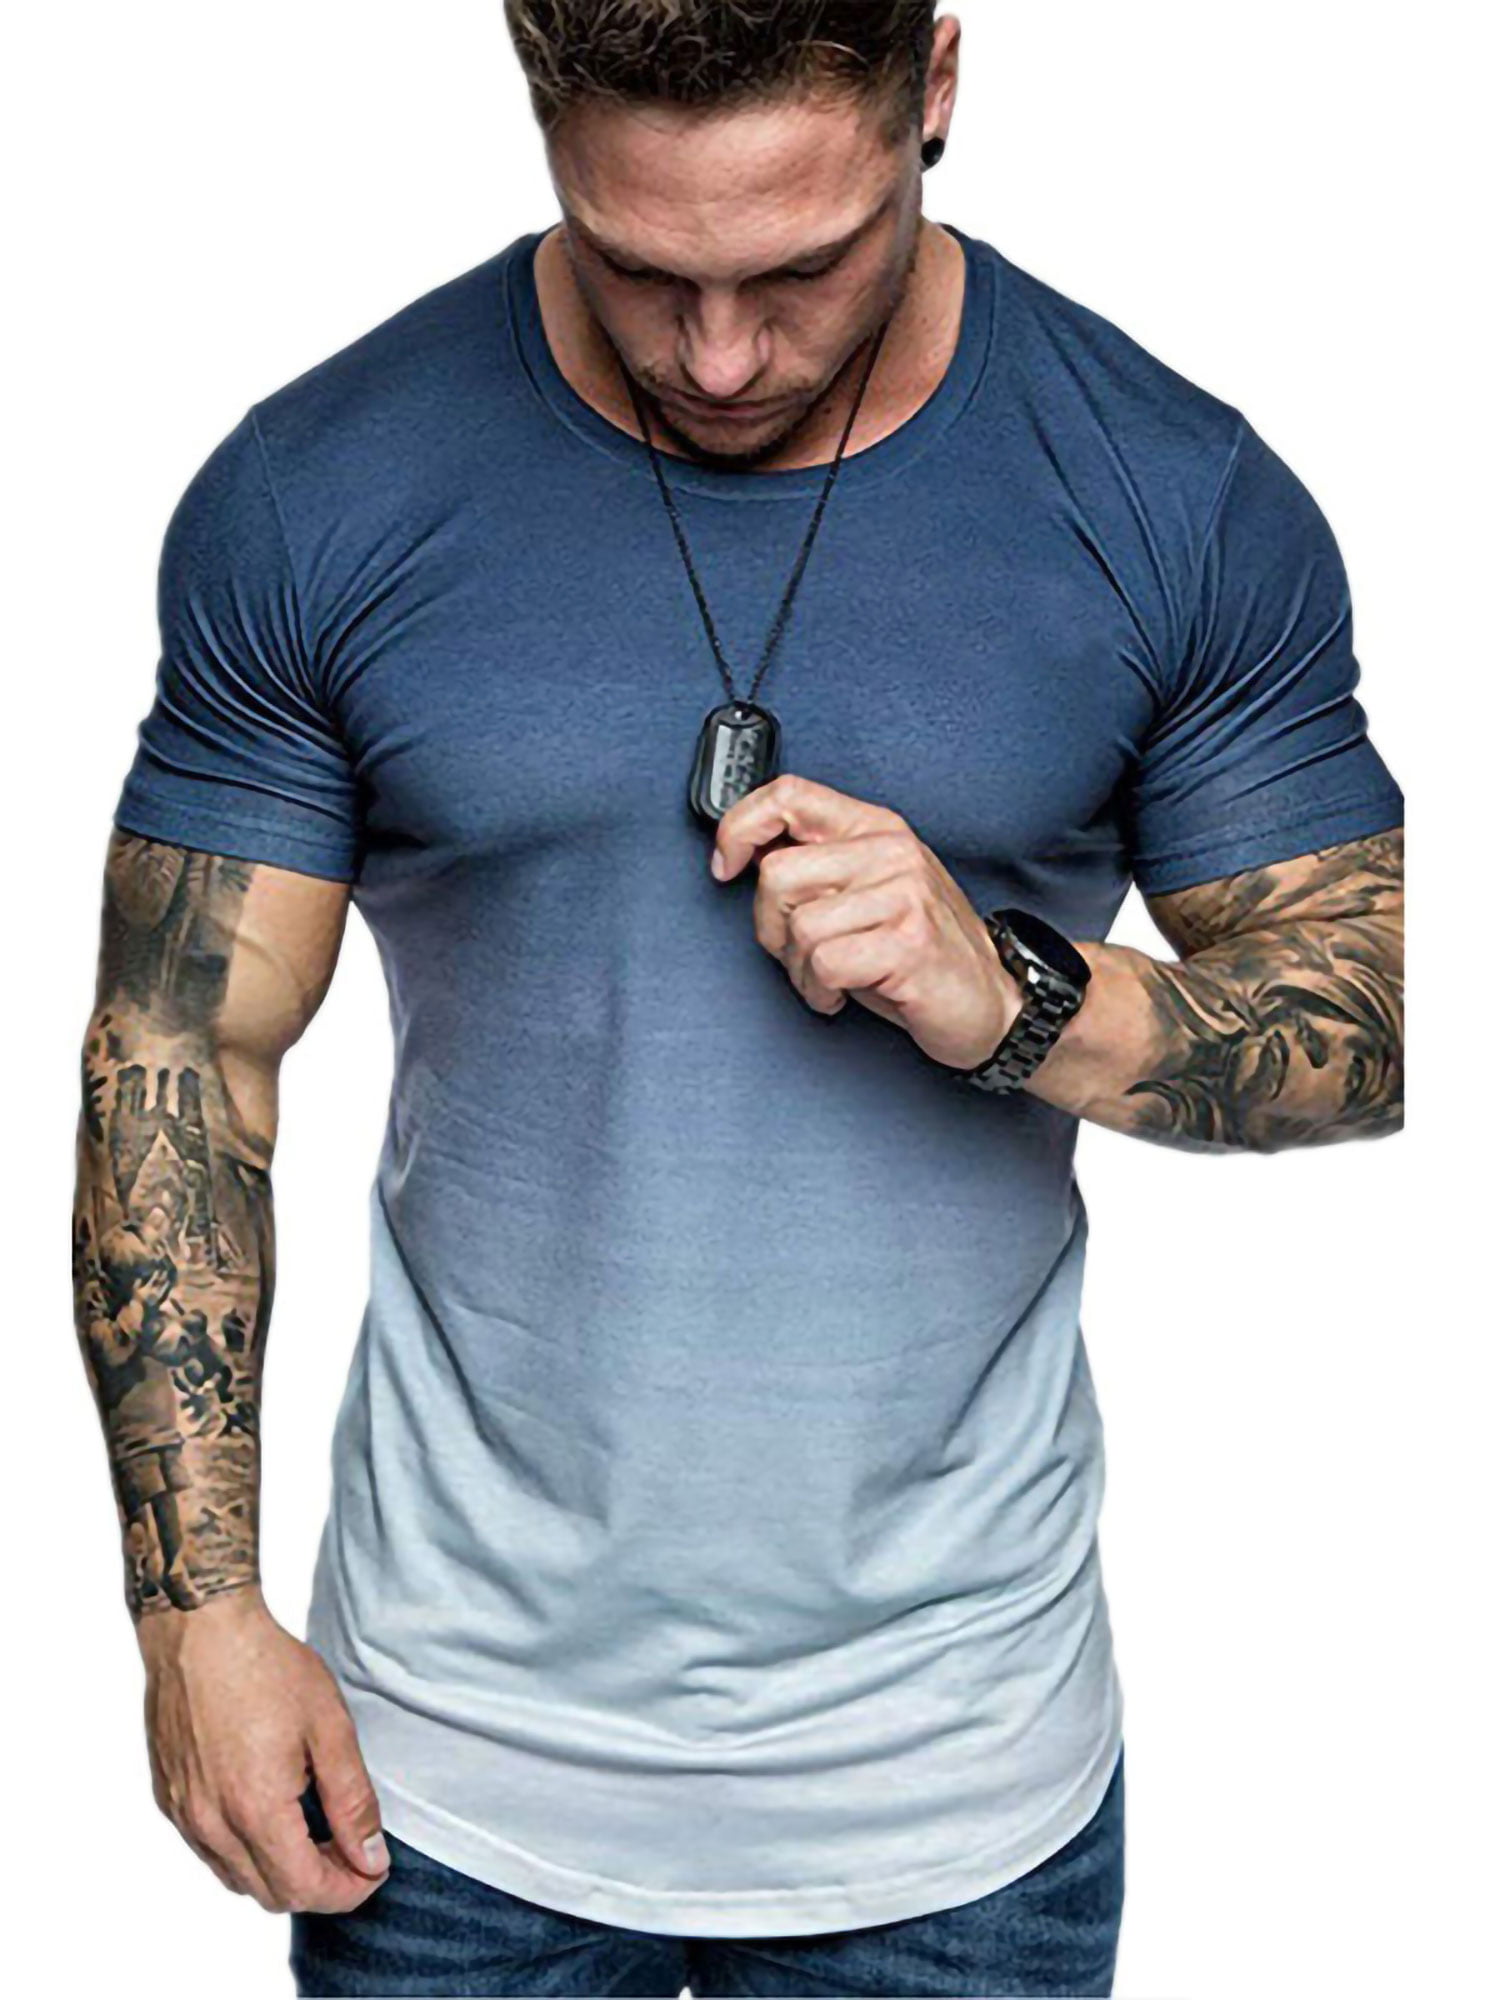 Fashion Men's Tee Slim Fit Short Sleeve Muscle Cotton Casual Tops Blouse Shirts&